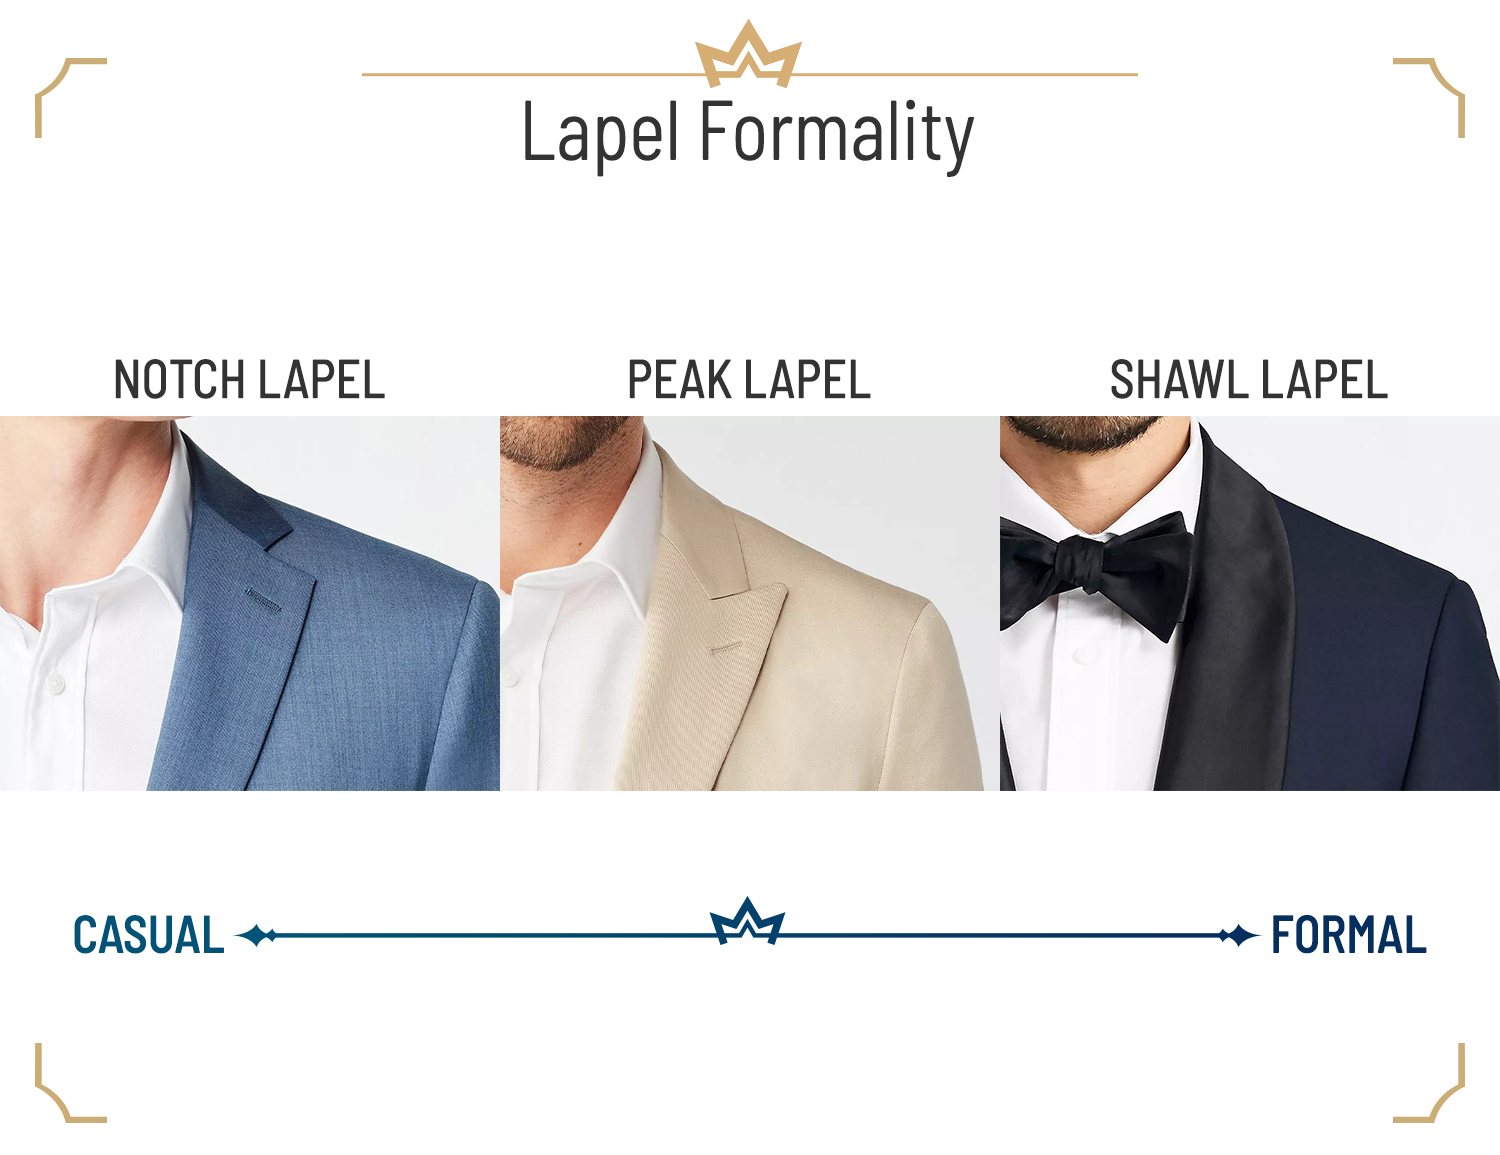 Consider the formality of the different suit lapels